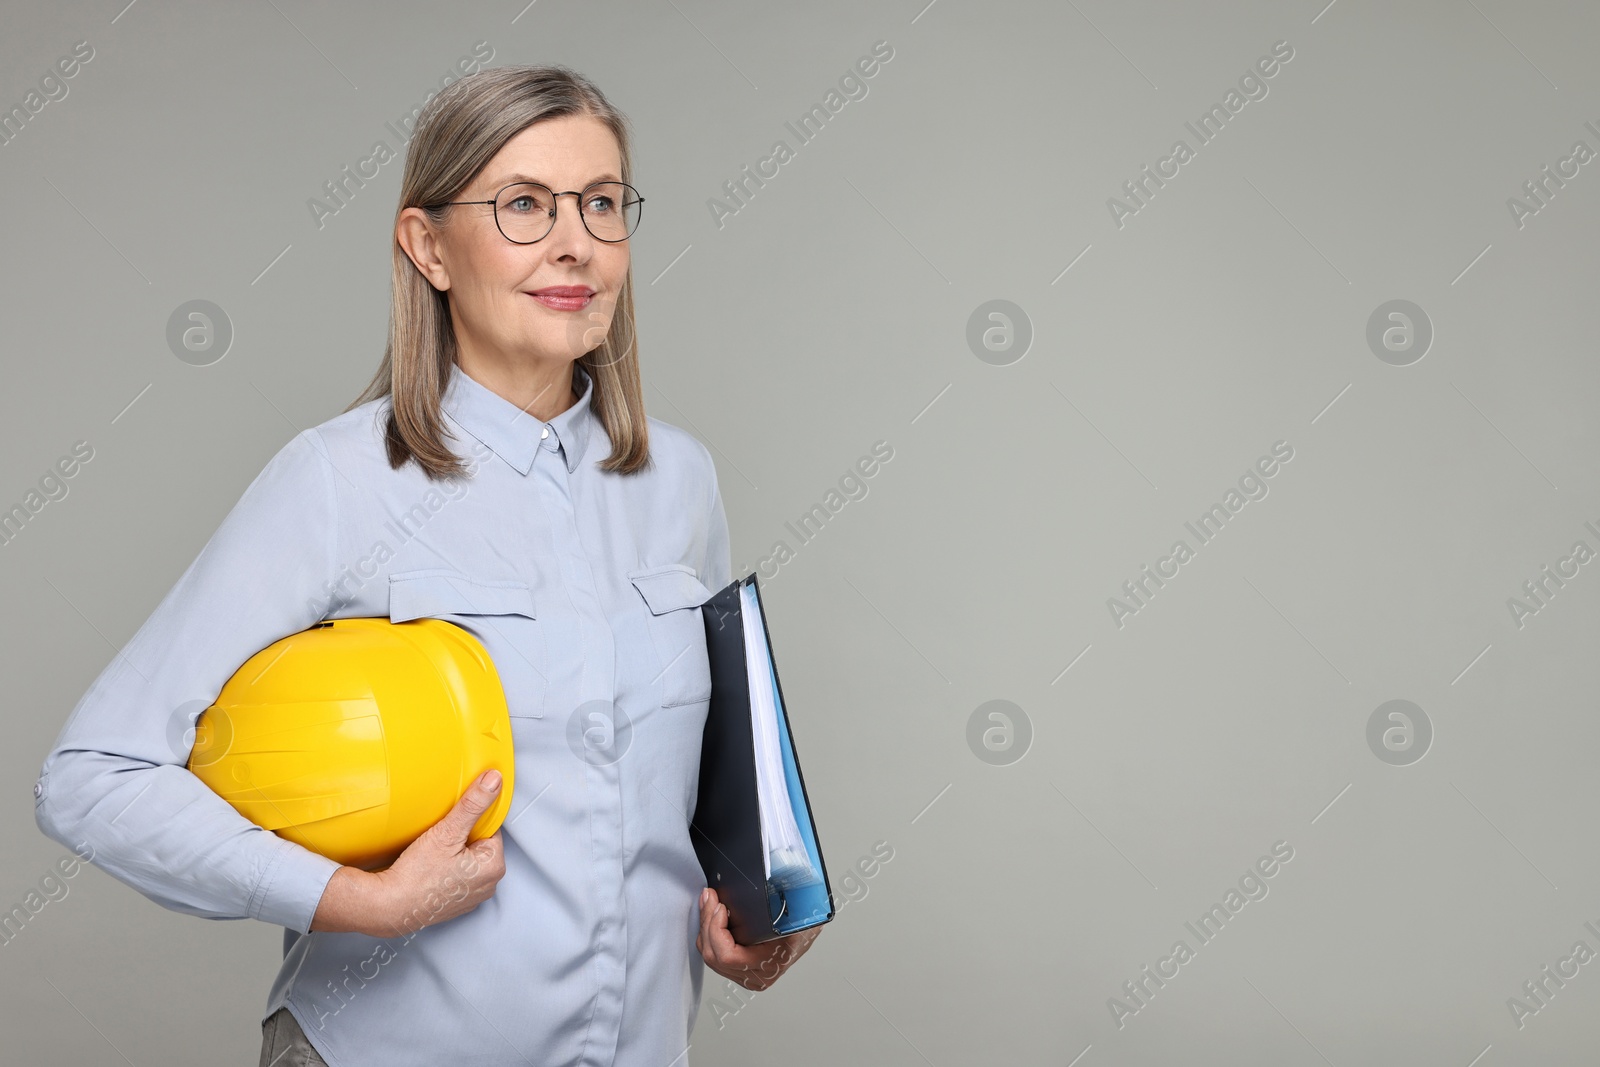 Photo of Architect with hard hat and tube on grey background, space for text